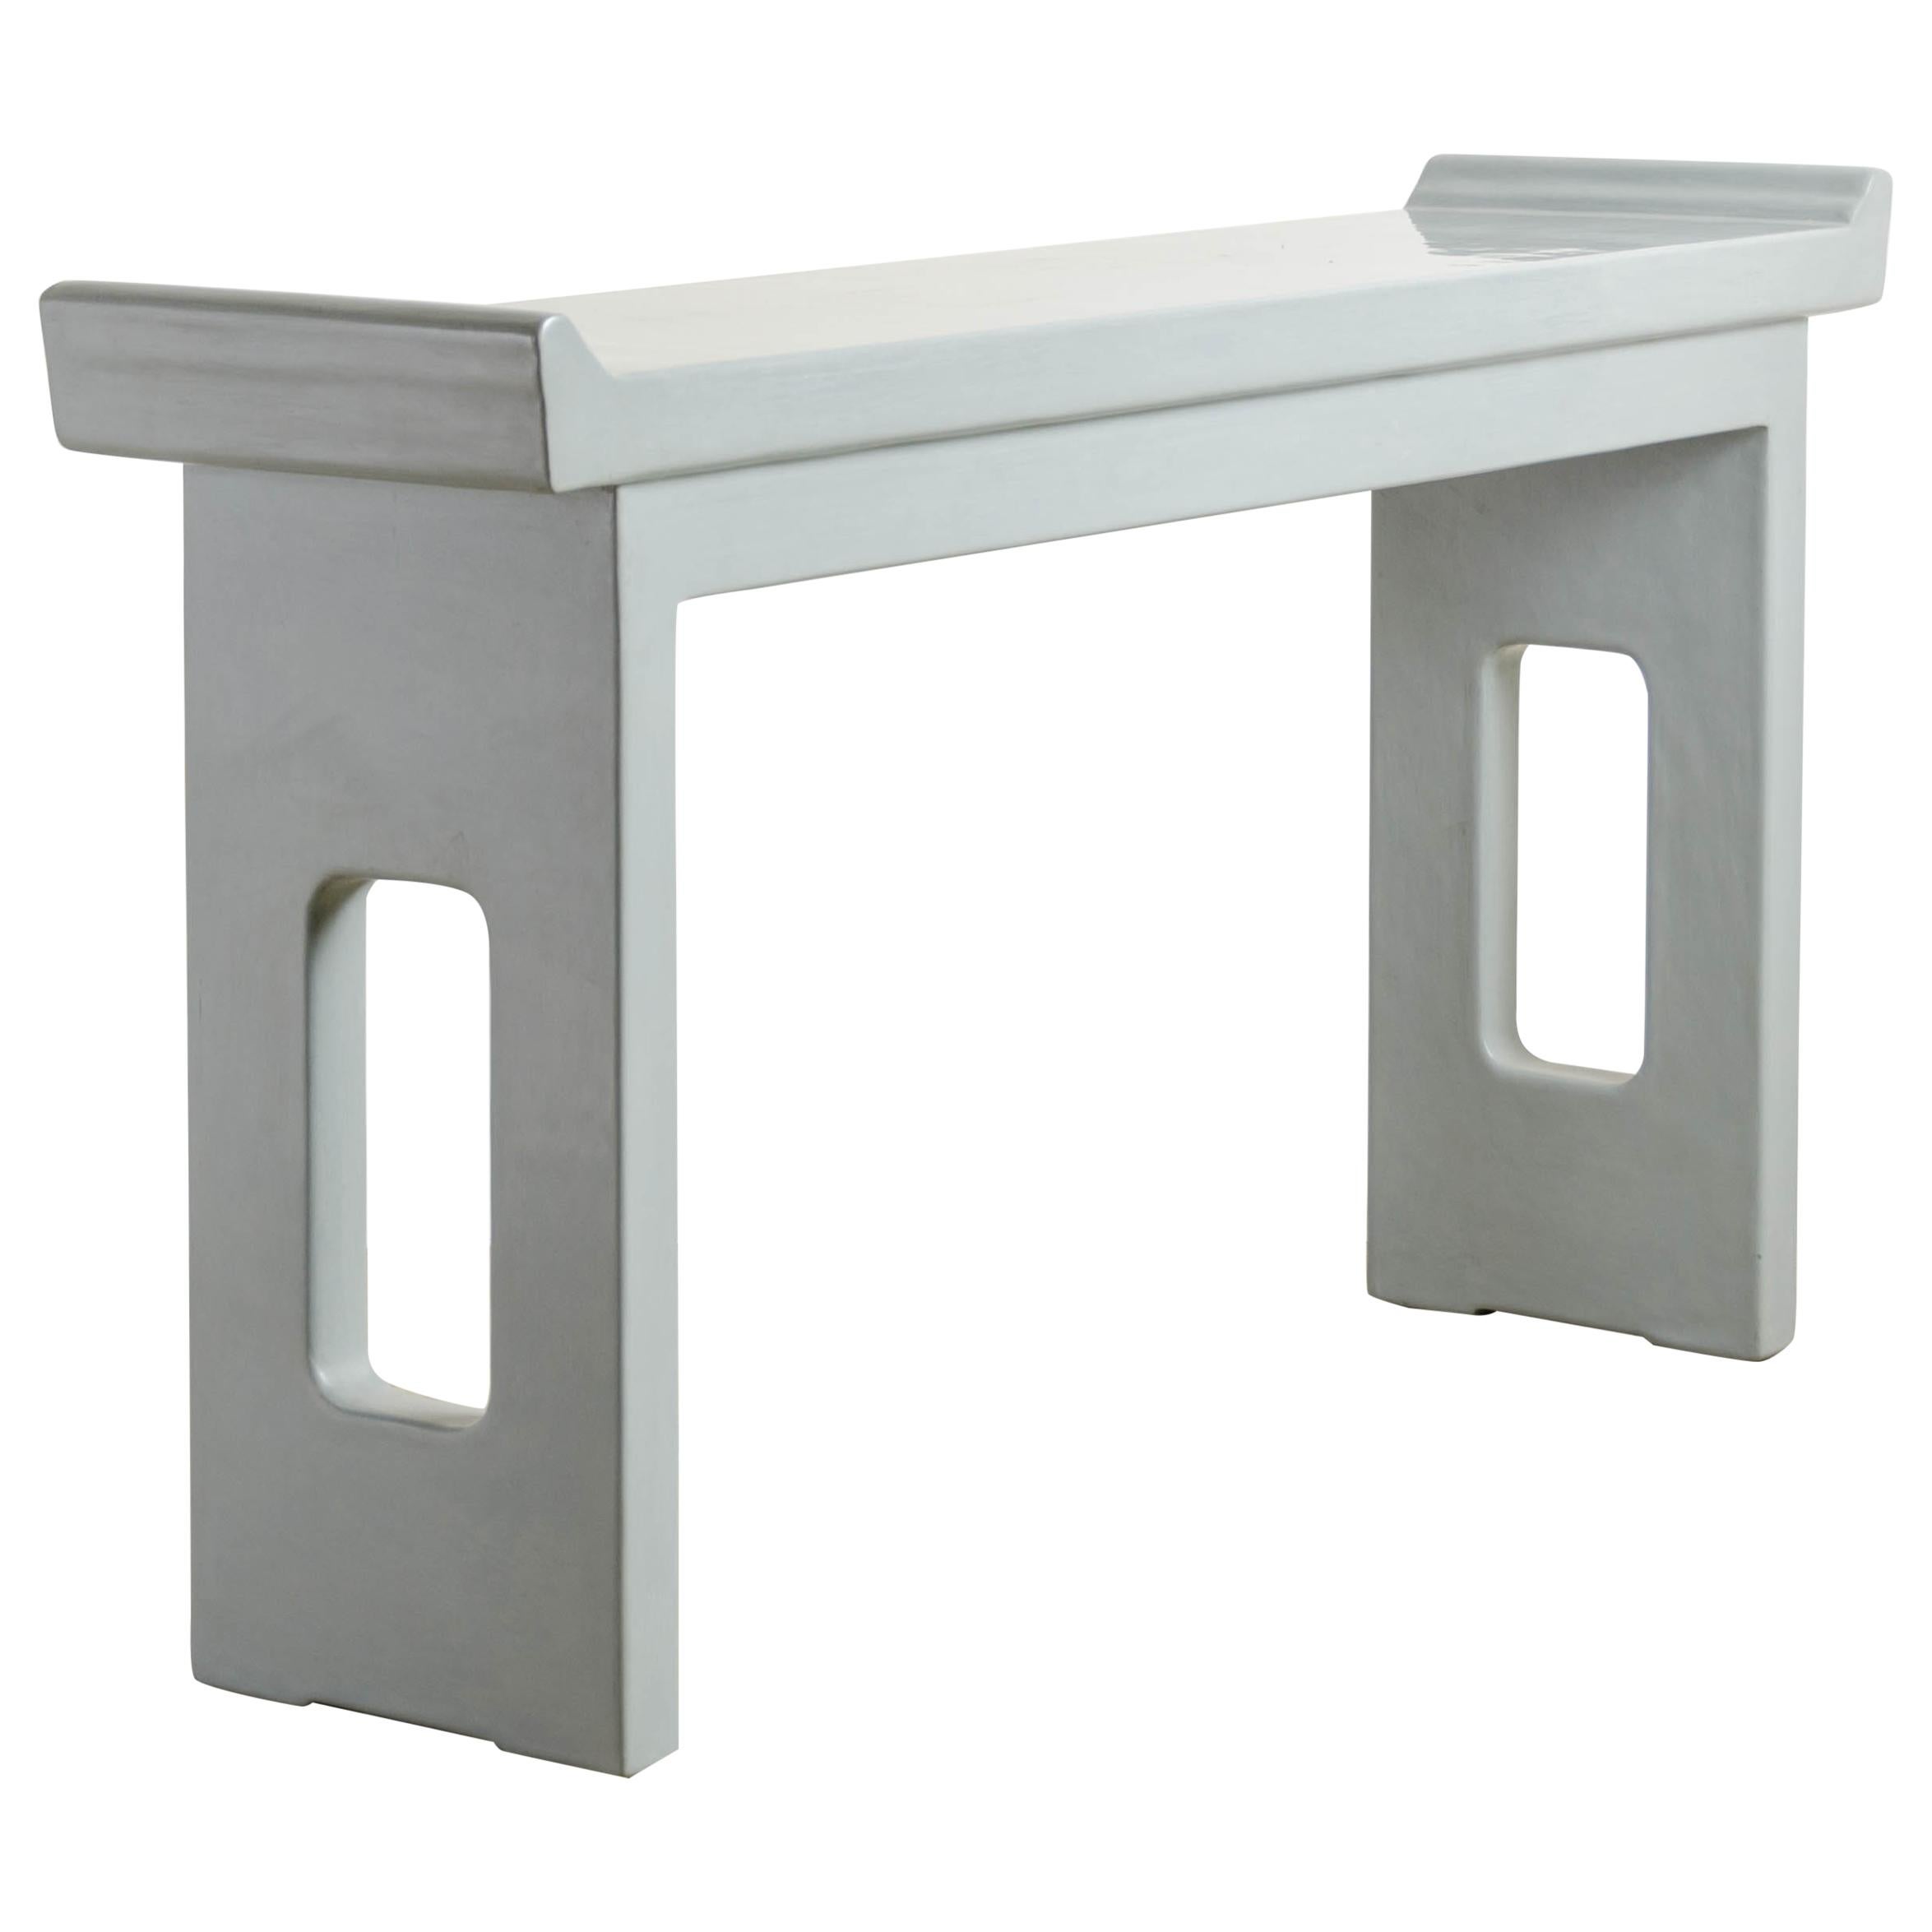 Altar Table, Grey Lacquer by Robert Kuo, Handmade, Limited Edition